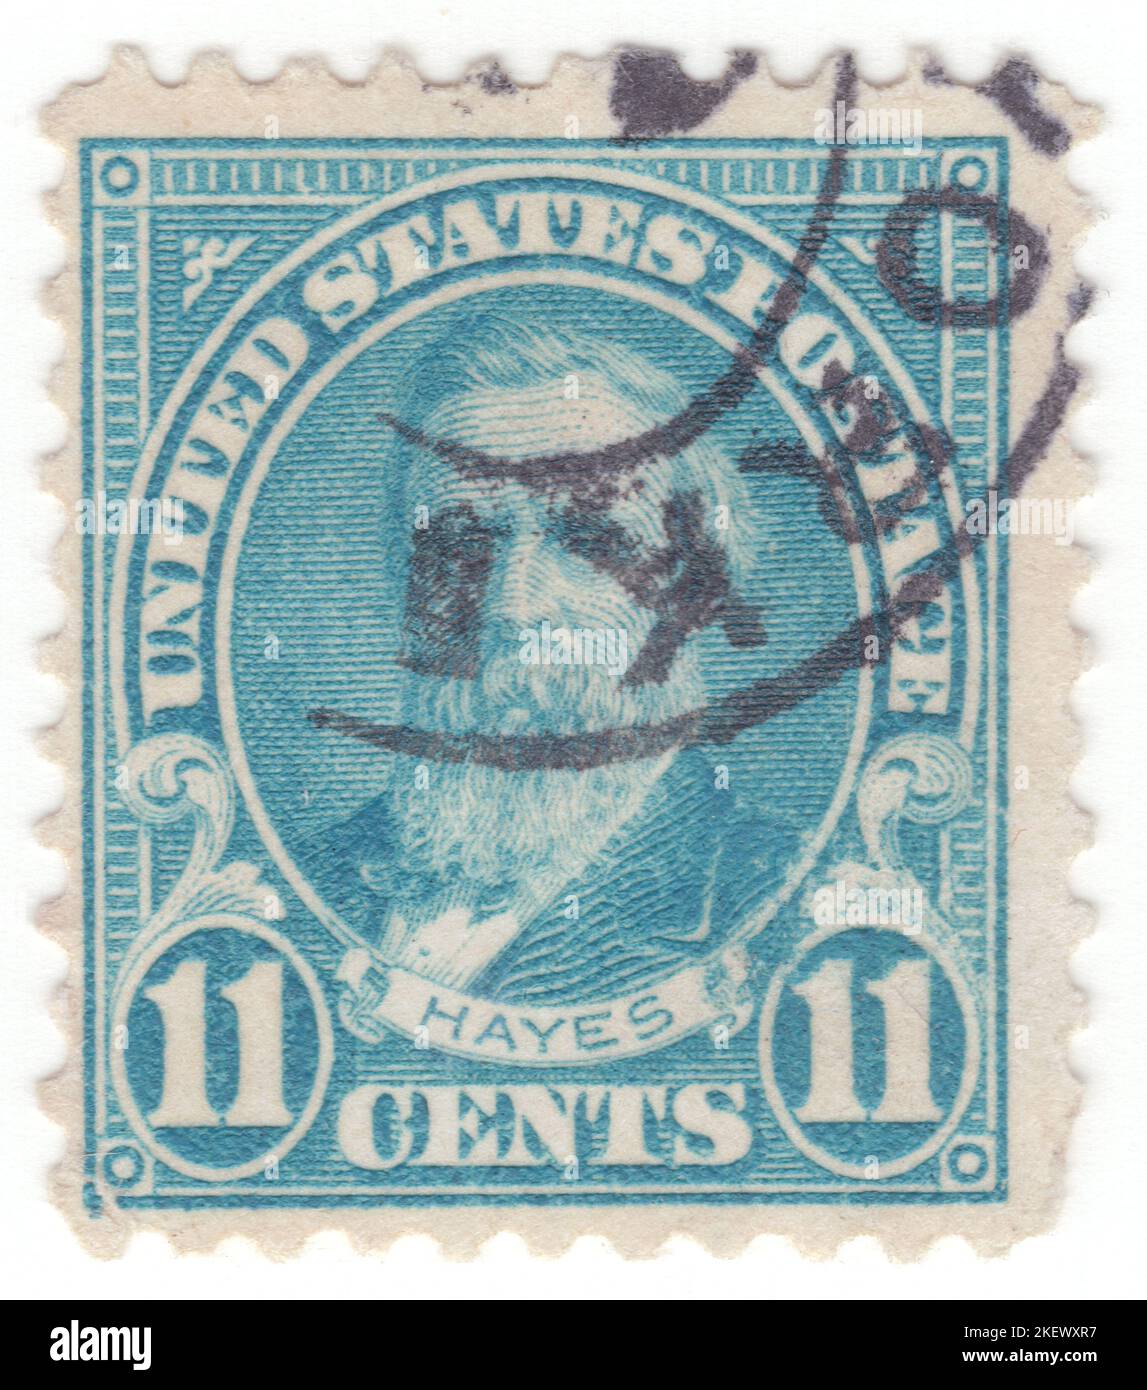 USA - 1922: An 11 cents light blue postage stamp depicting portrait of Rutherford Birchard Hayes. American lawyer and politician who served as the 19th president of the United States from 1877 to 1881, after serving in the U.S. House of Representatives and as governor of Ohio. Before the American Civil War, Hayes was a lawyer and staunch abolitionist who defended refugee slaves in court proceedings. He served in the Union Army and the House of Representatives before assuming the presidency. His presidency represents a turning point in U.S. history, as historians consider Stock Photo